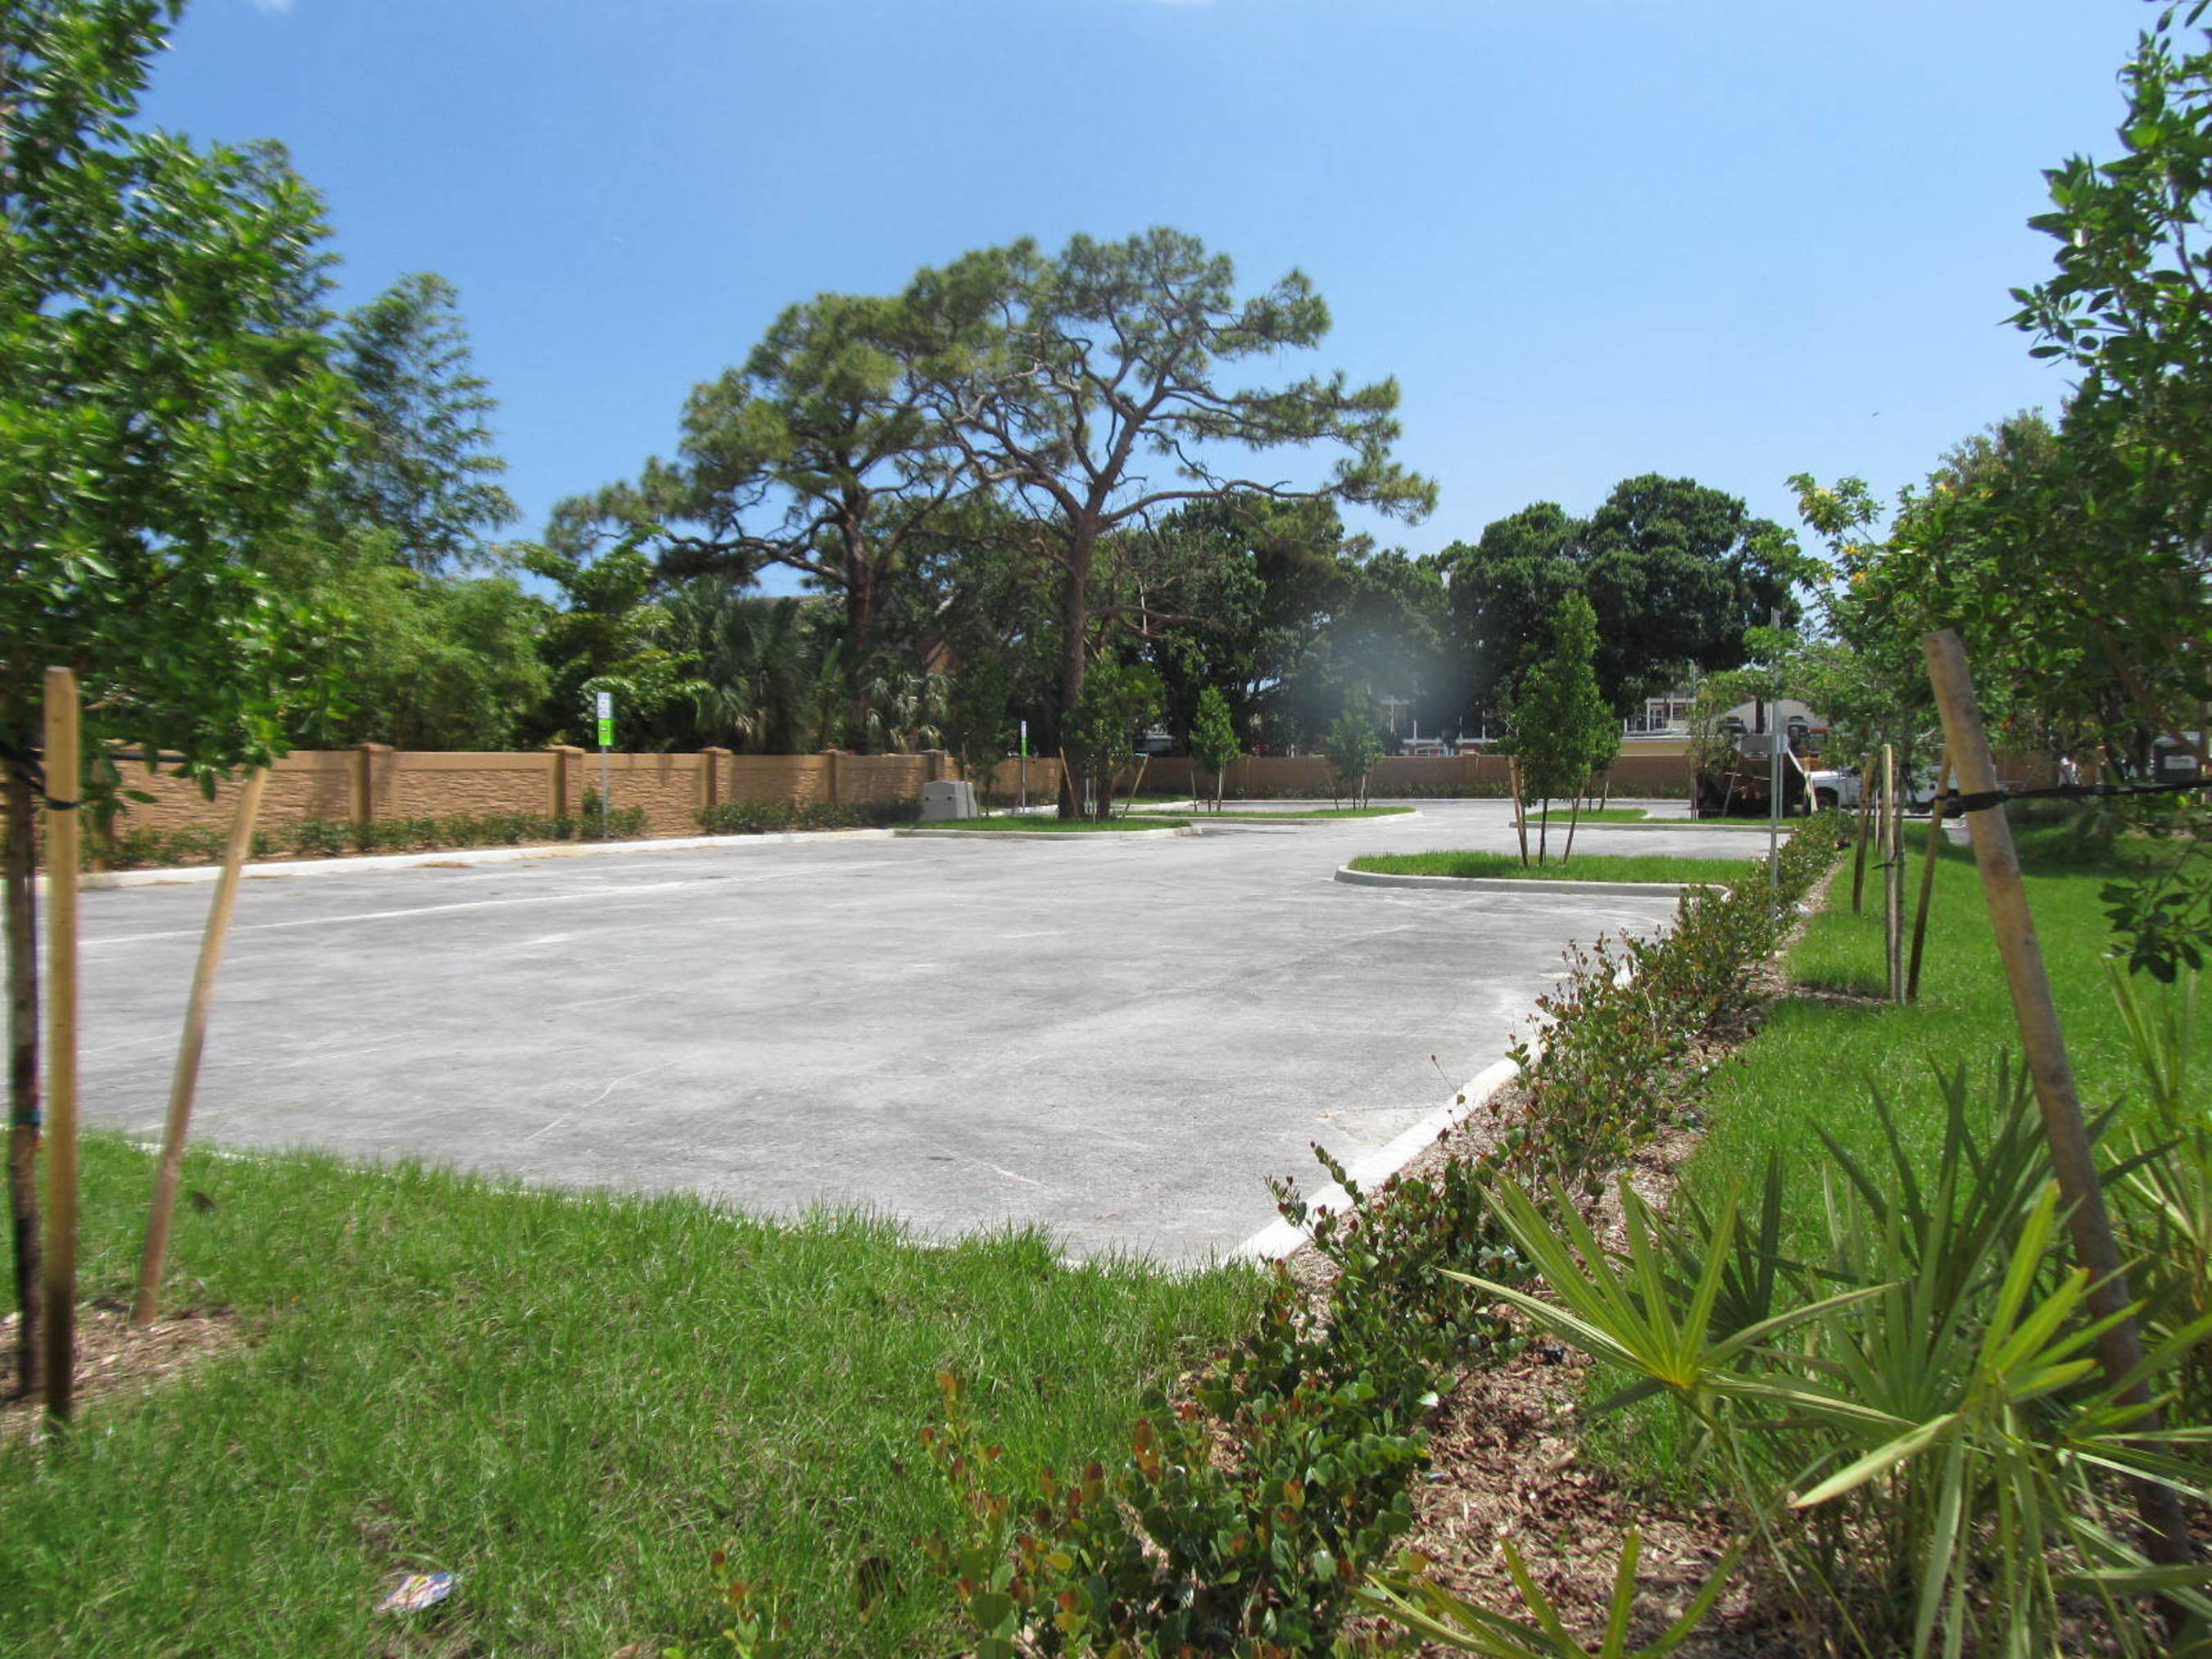 The City of Wilton Manors Unveils New 42-space Parking Lot (PRNewsFoto/City of Wilton Manors)